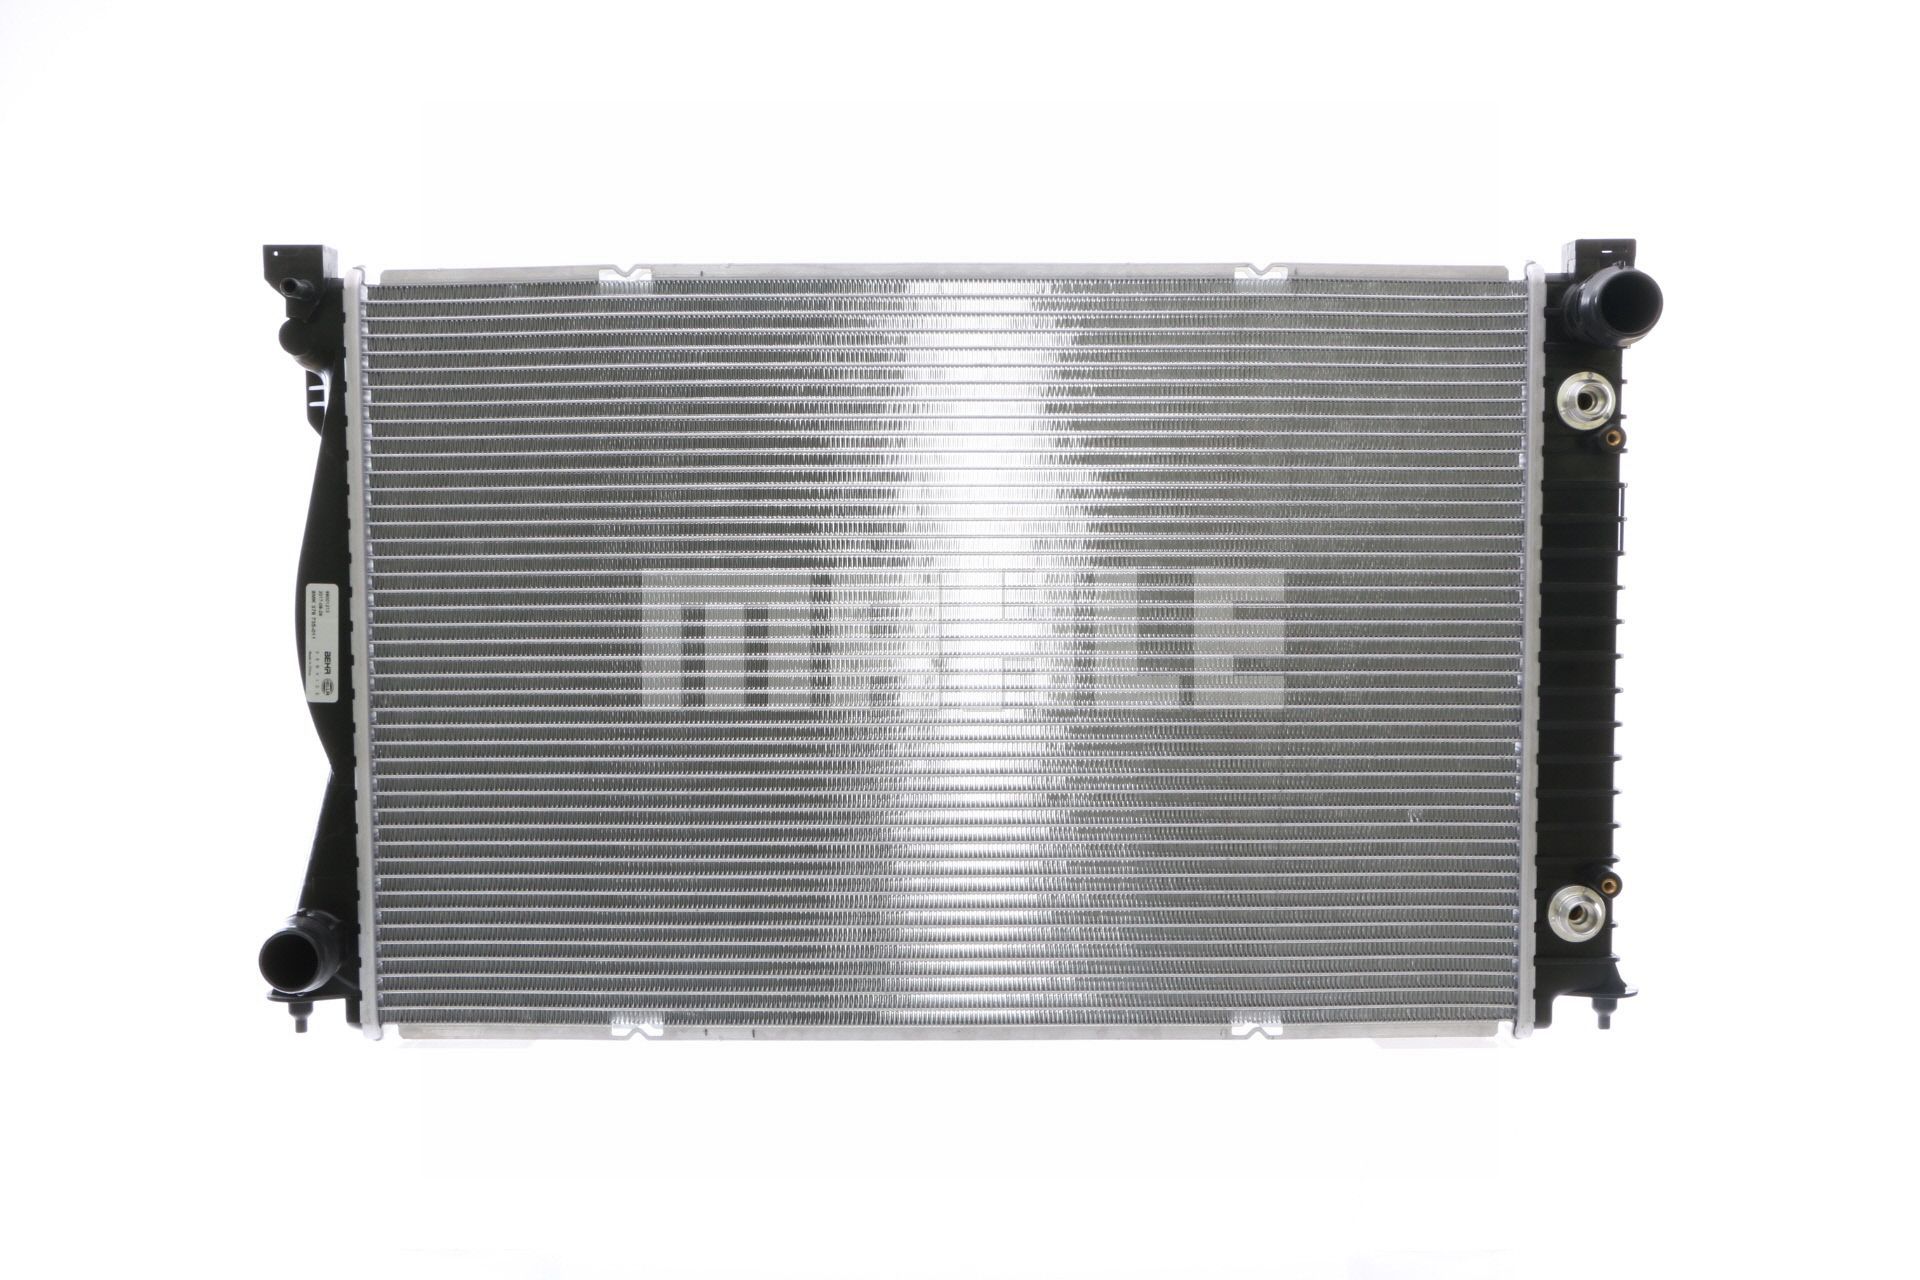 376735011 MAHLE ORIGINAL for vehicles with air conditioning, 678 x 438 x 32 mm, Automatic Transmission, Brazed cooling fins Radiator CR 830 000S buy